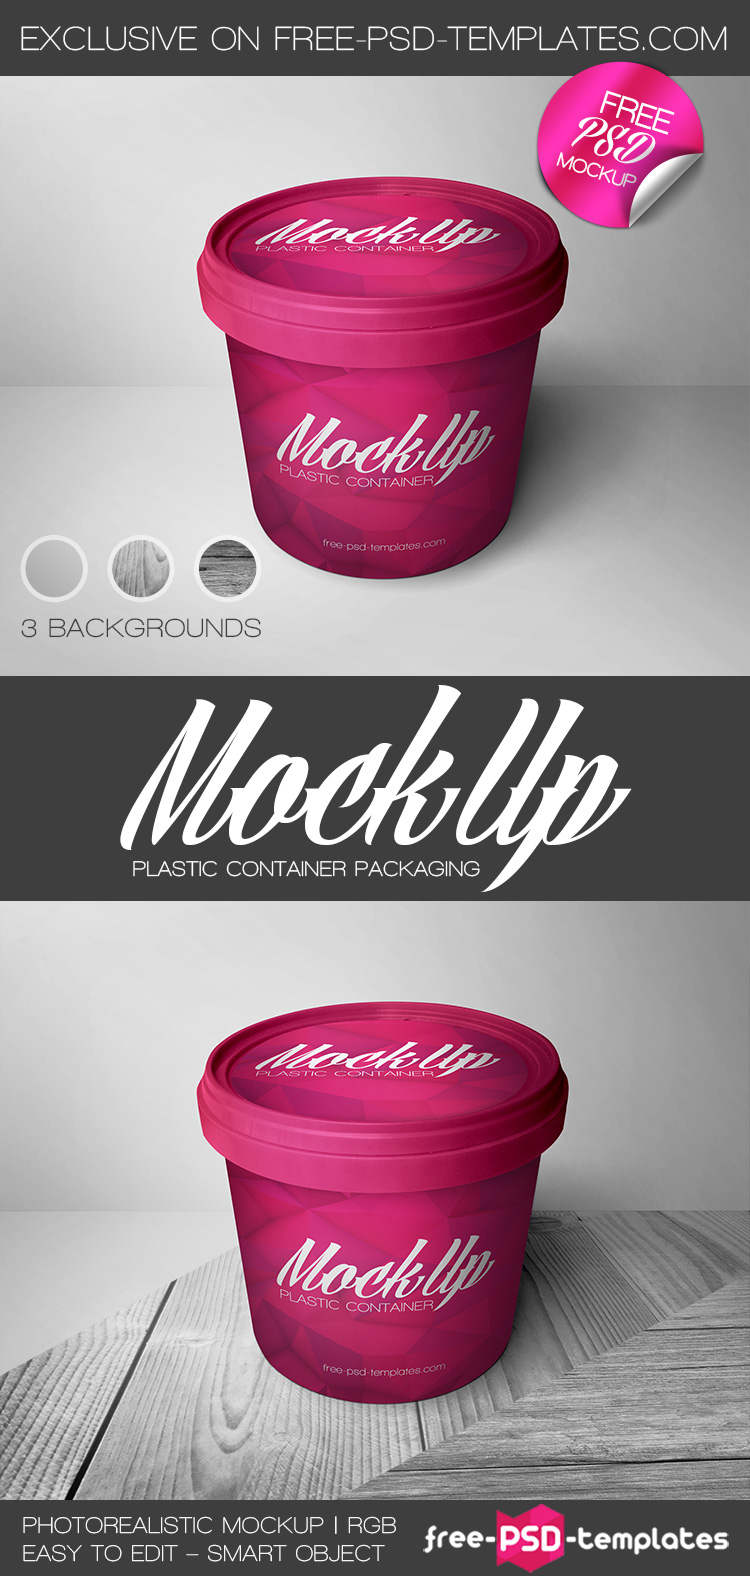 Download Free Plastic Container Packaging Mock-up in PSD | Free PSD Templates